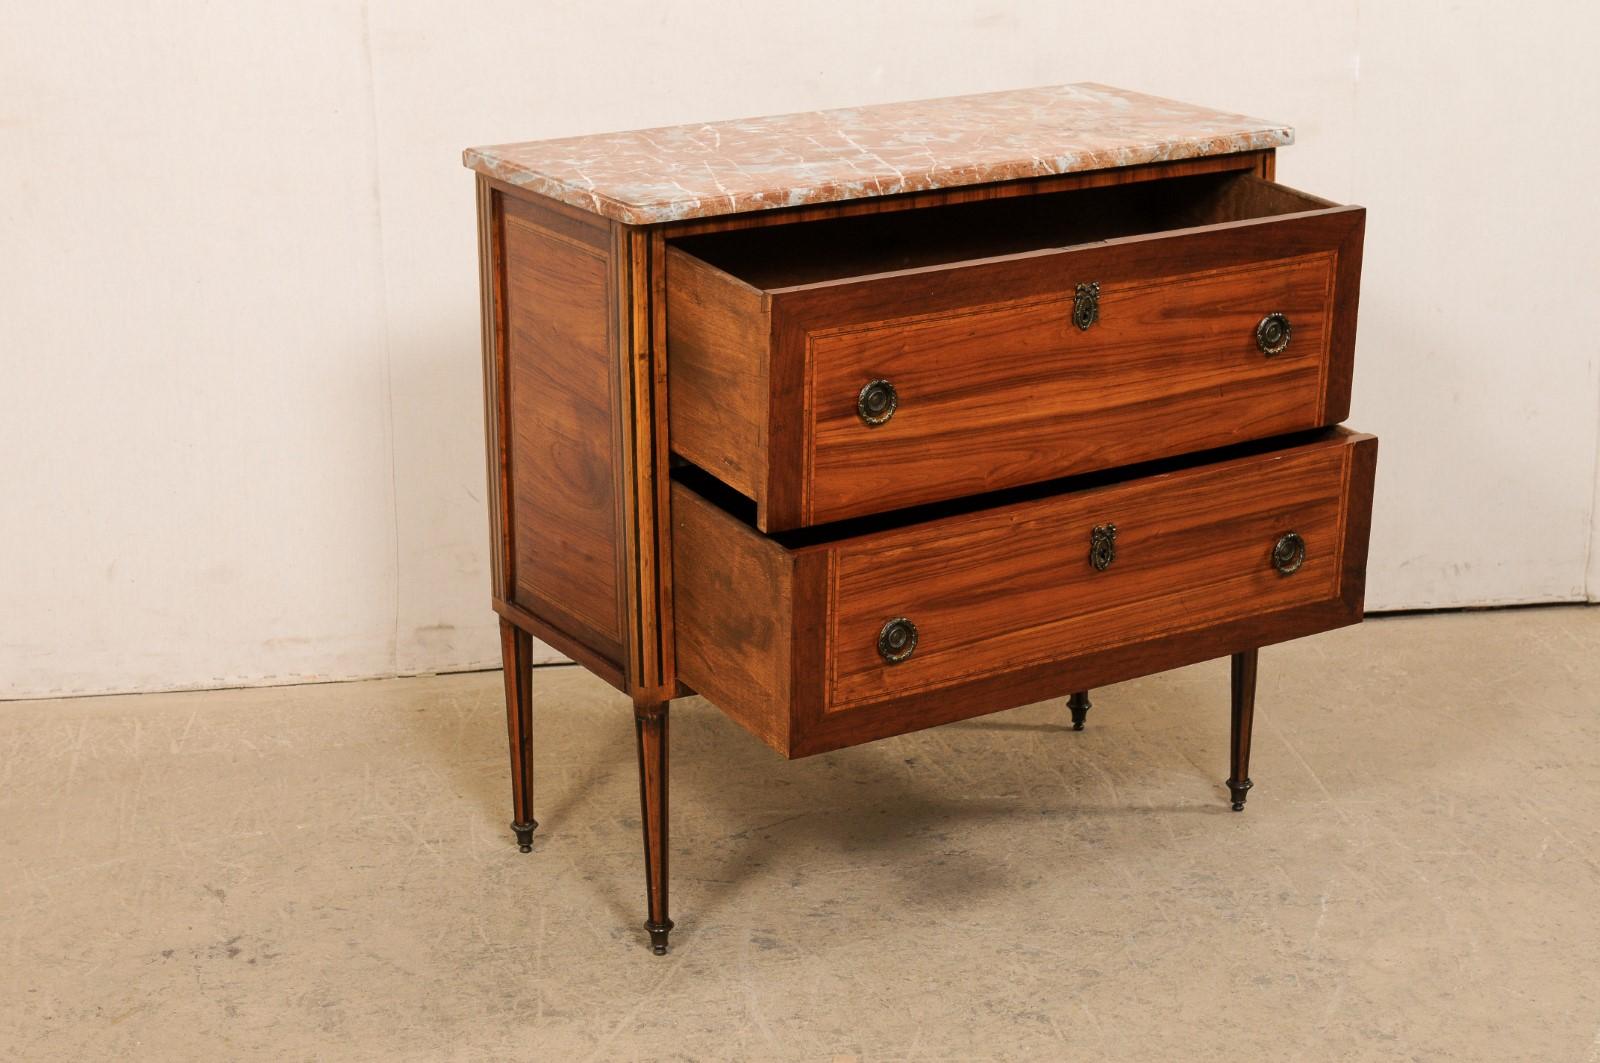 French 19th C Raised Commode w/ Lovely Inlays, Marble Top & Neoclassic Hardware For Sale 4